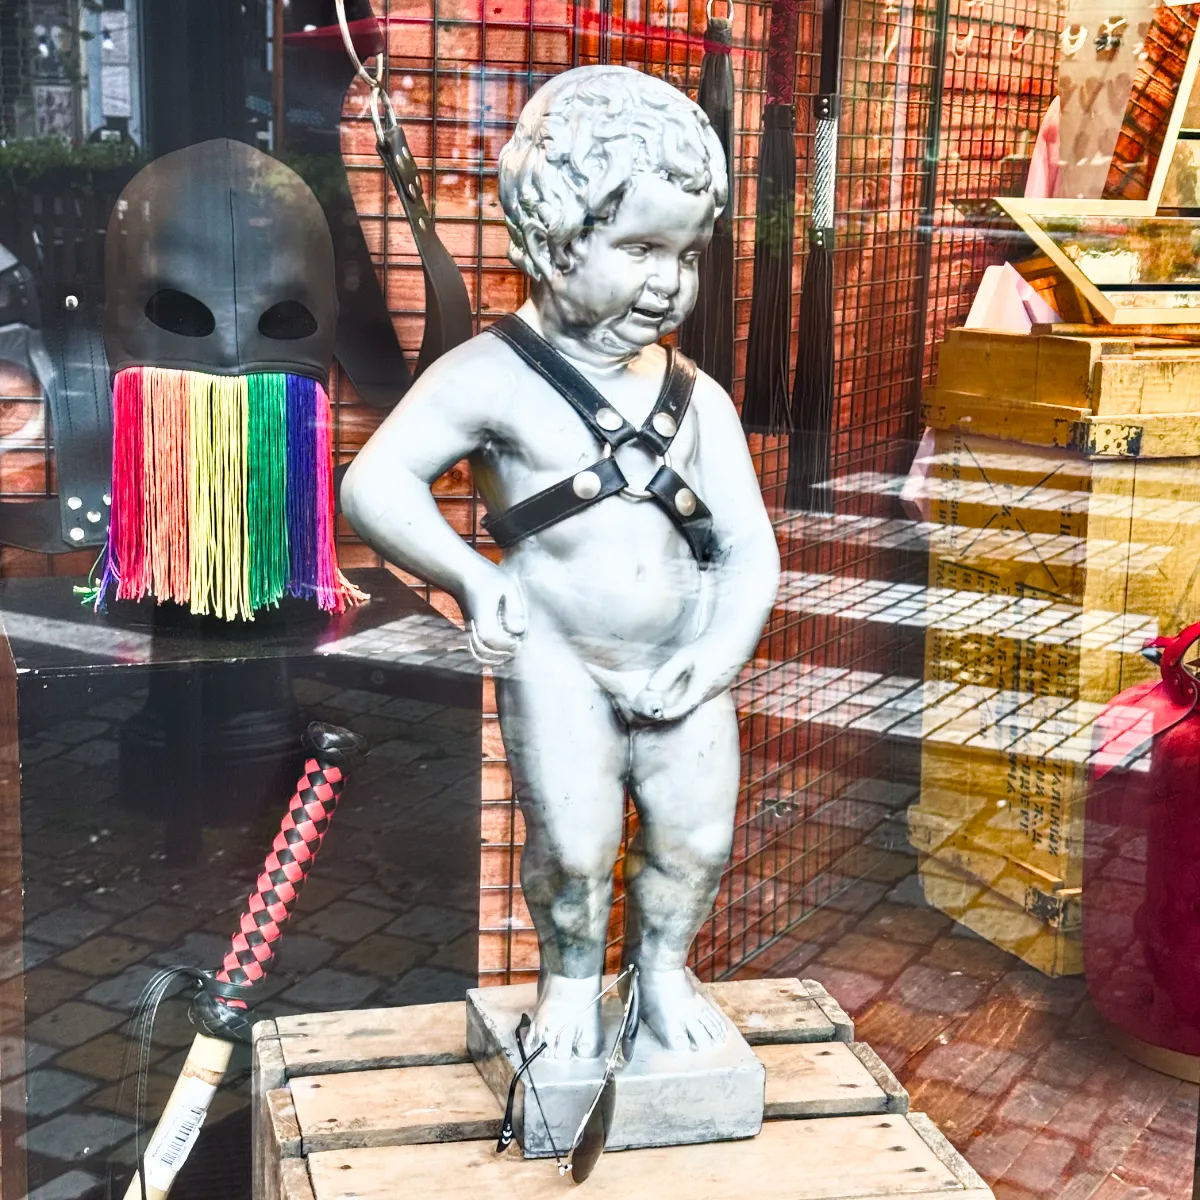 Piss child sculpture replica in a gay fetish store wearing a harness